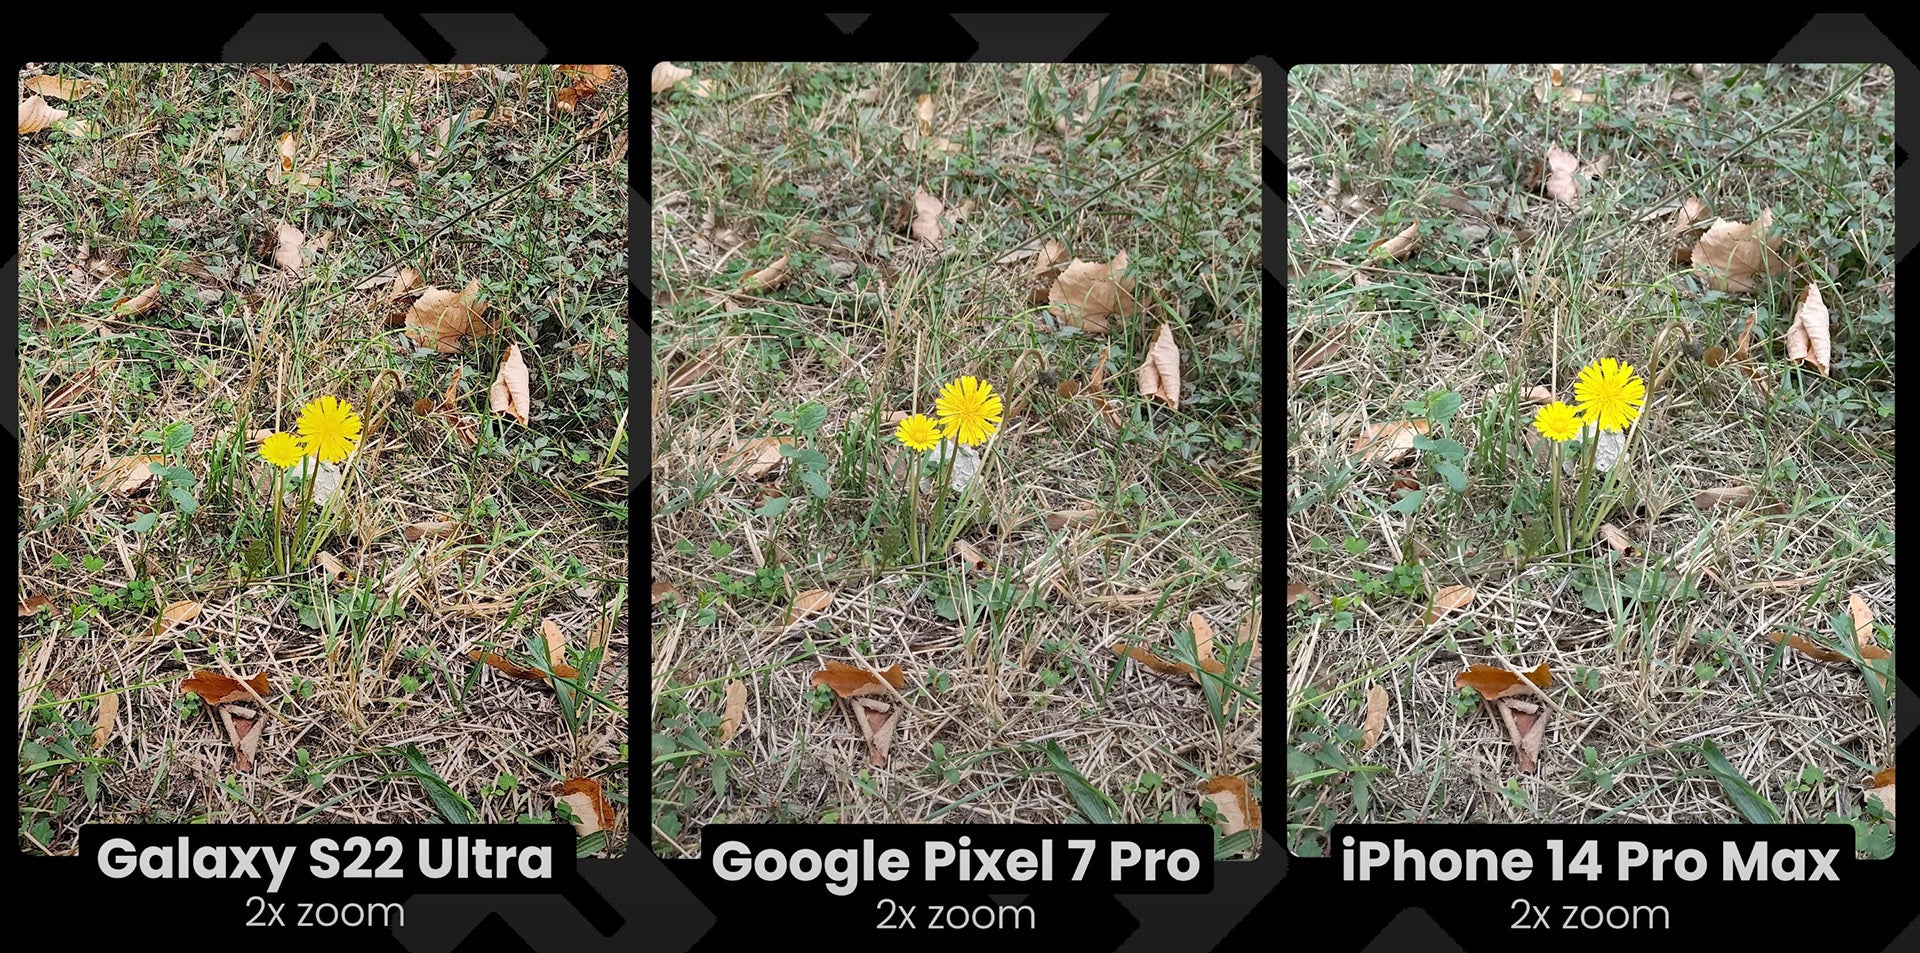 (Image Credit - PhoneArena) Despite having the highest resolution sensor, at 2X the Galaxy S22 Ultra captures less detail than the iPhone 14 Pro and Pixel 7 Pro - Samsung and Xiaomi taken by surprise, Apple’s 2X camera too good